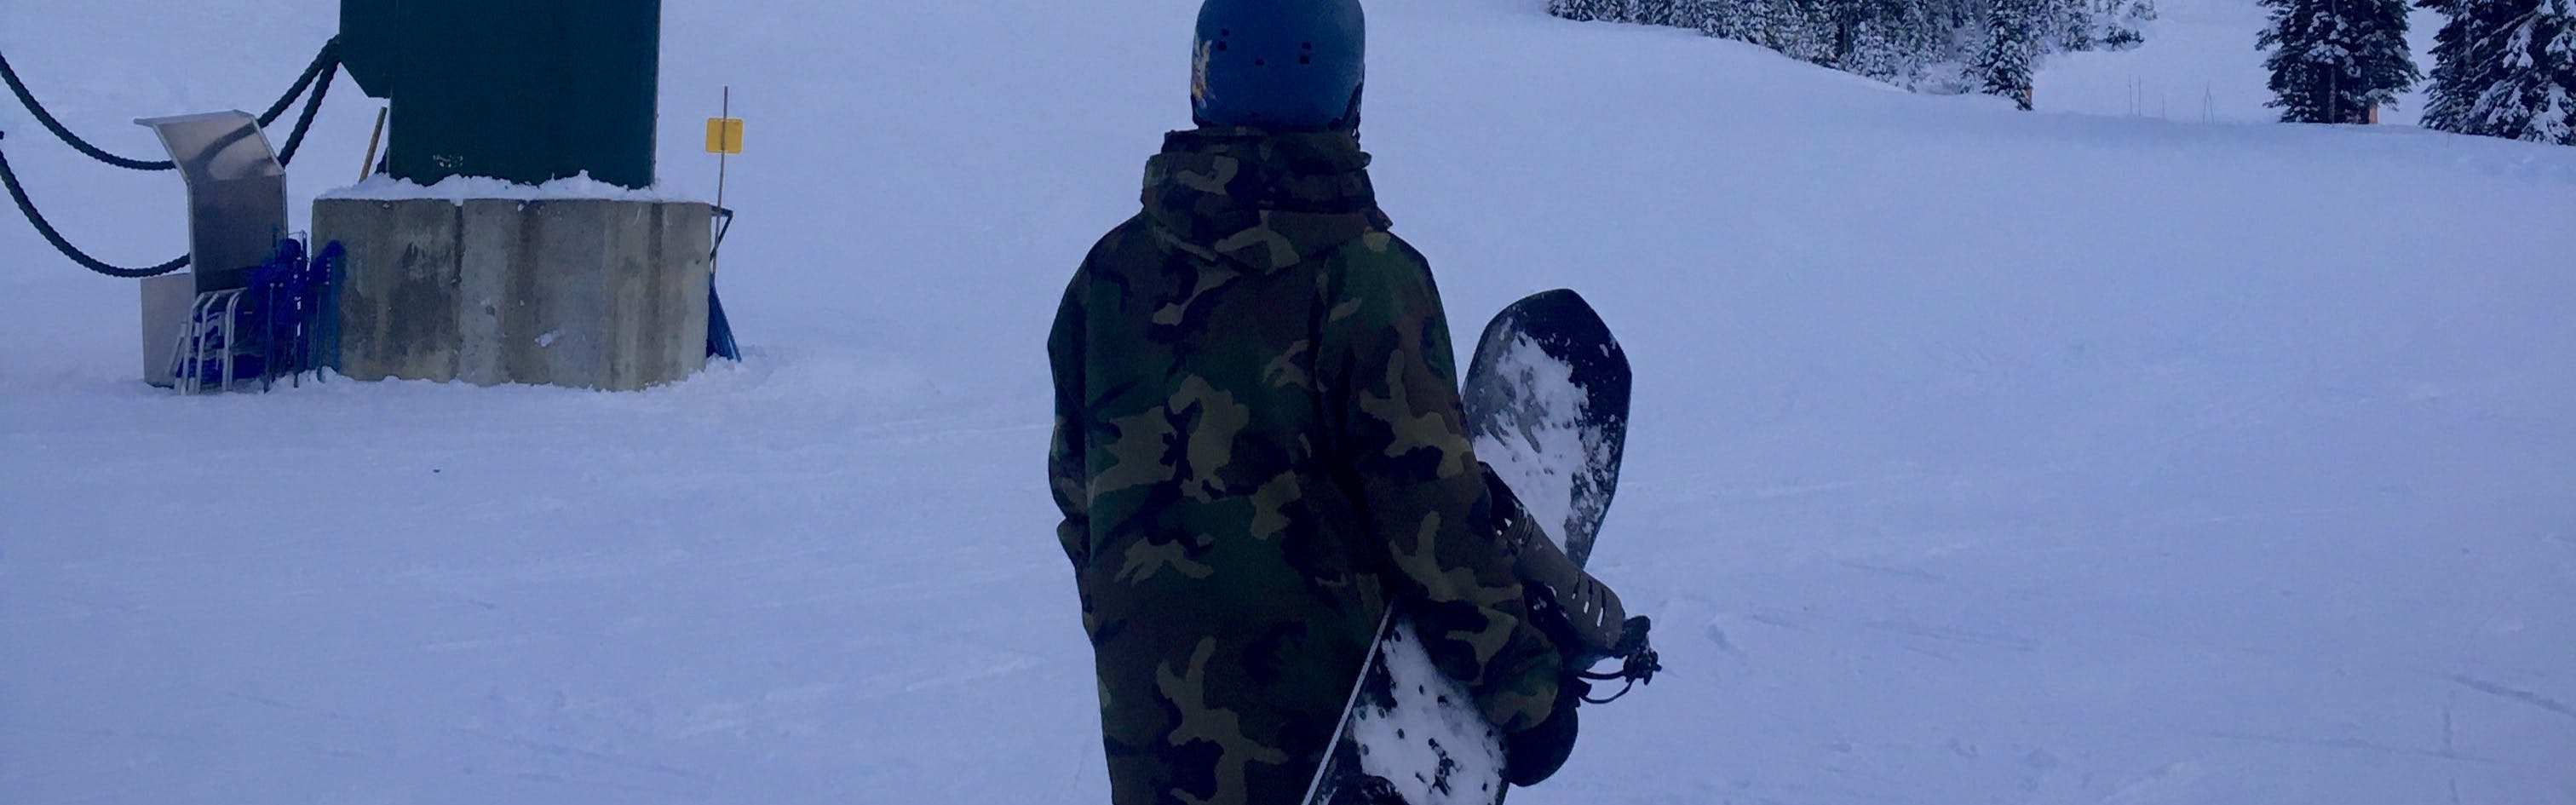 A man with a snowboard looks off at a snowy mountain in the distance.